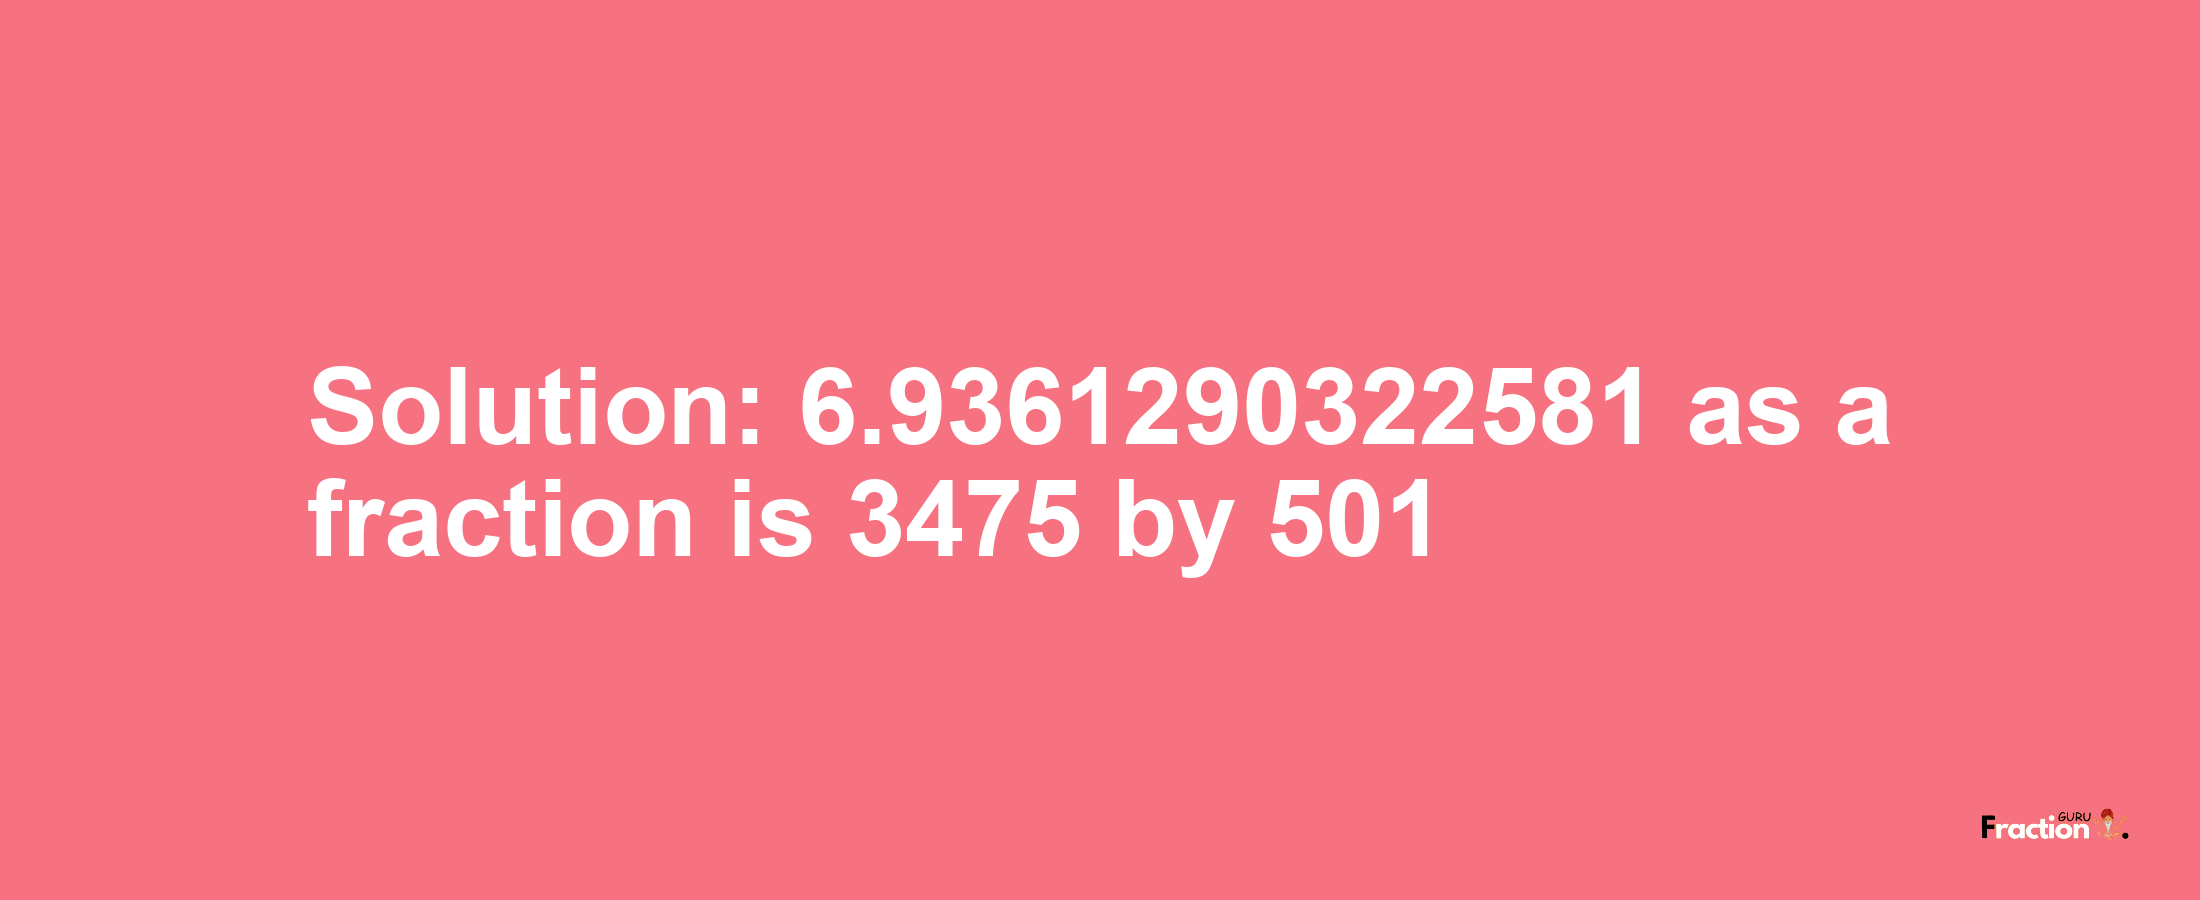 Solution:6.9361290322581 as a fraction is 3475/501